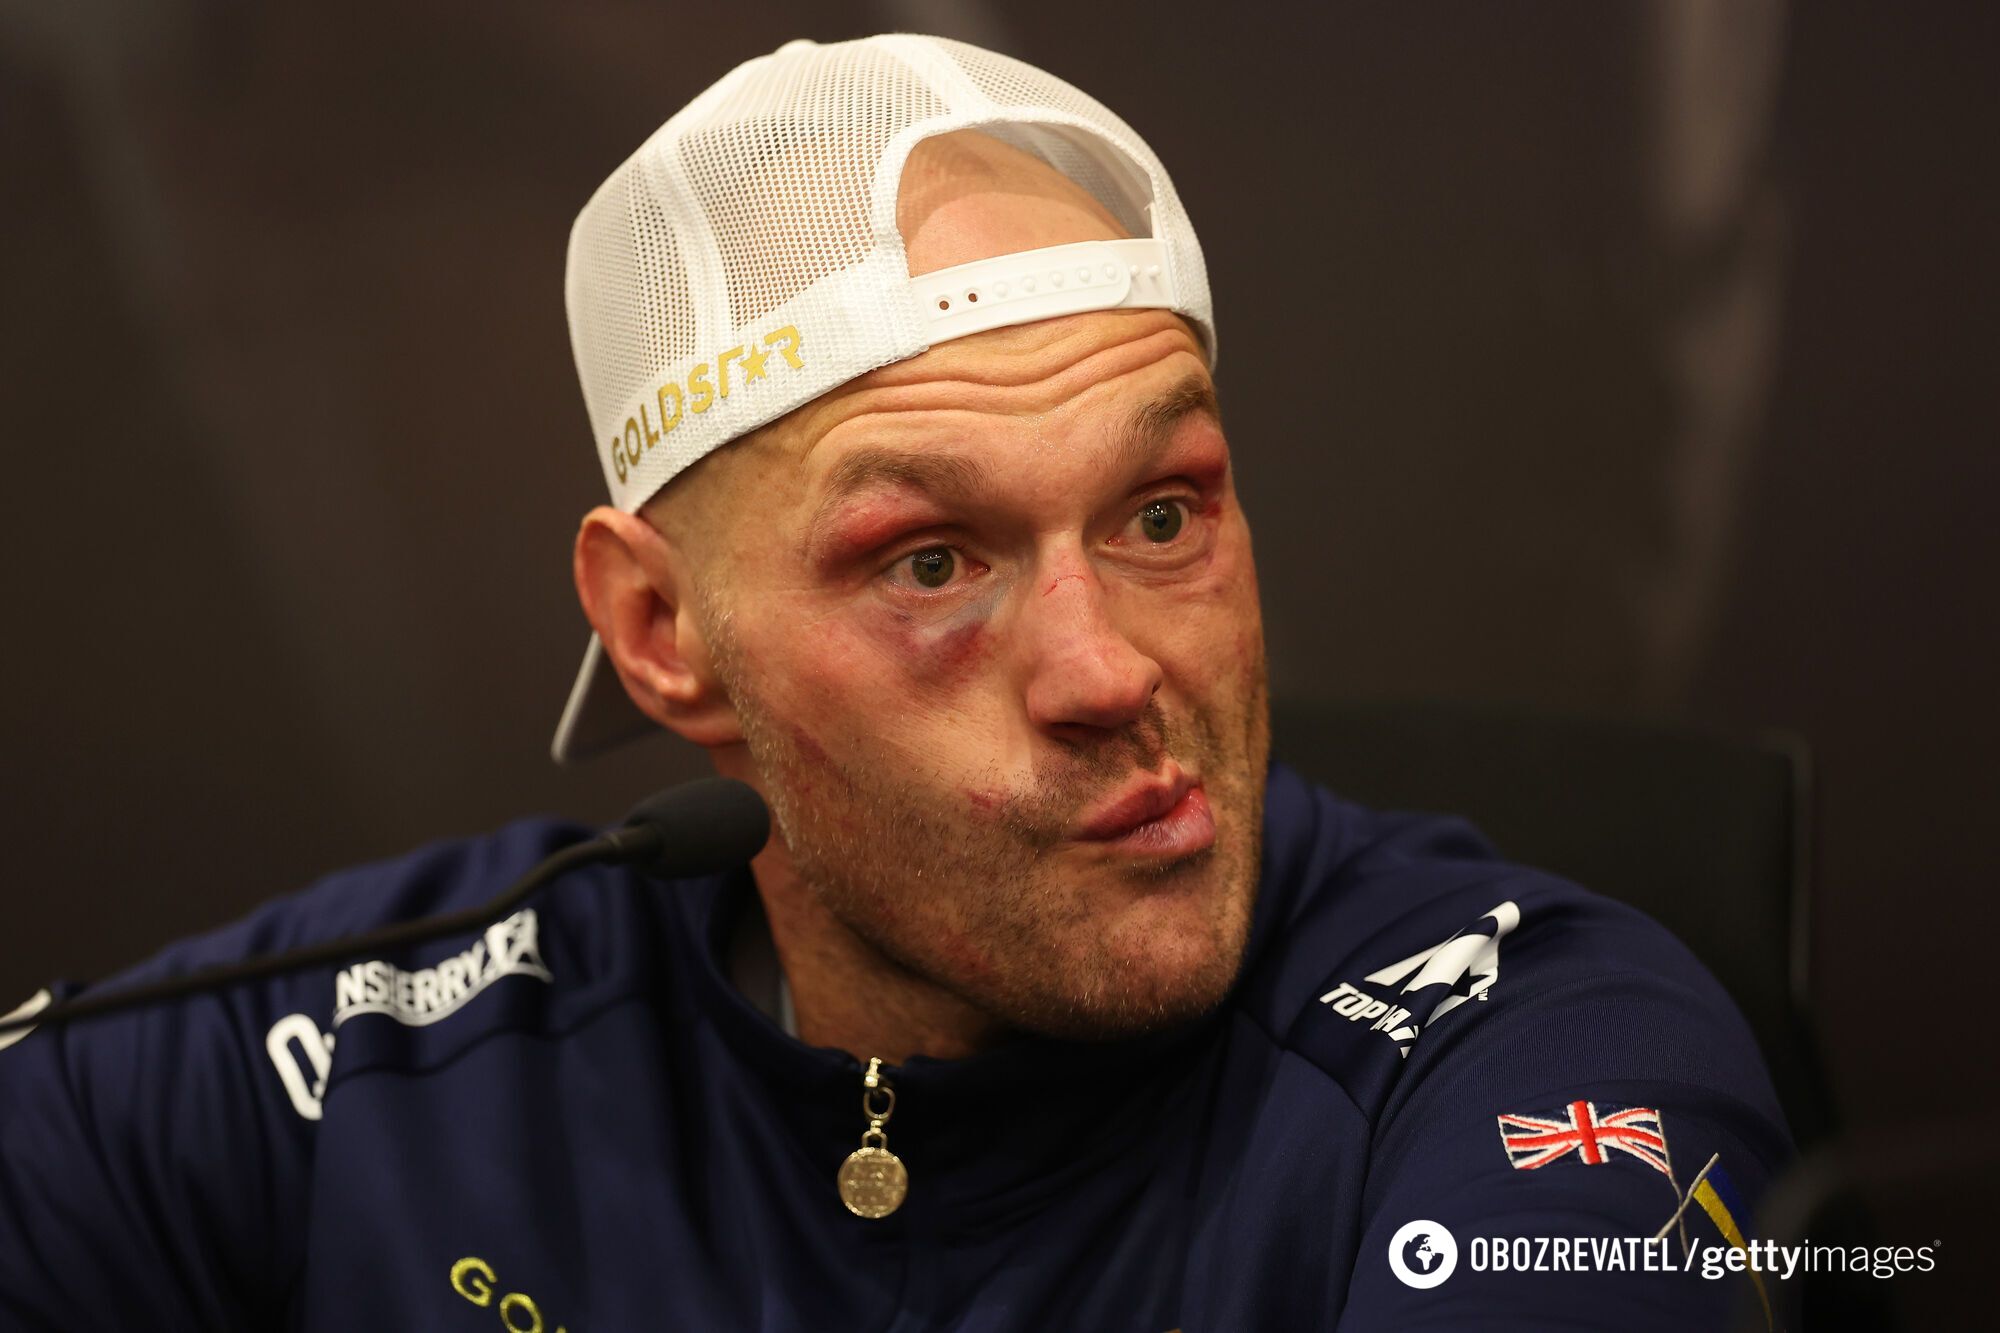 The fantastic rematch fee of Usyk – Fury was announced